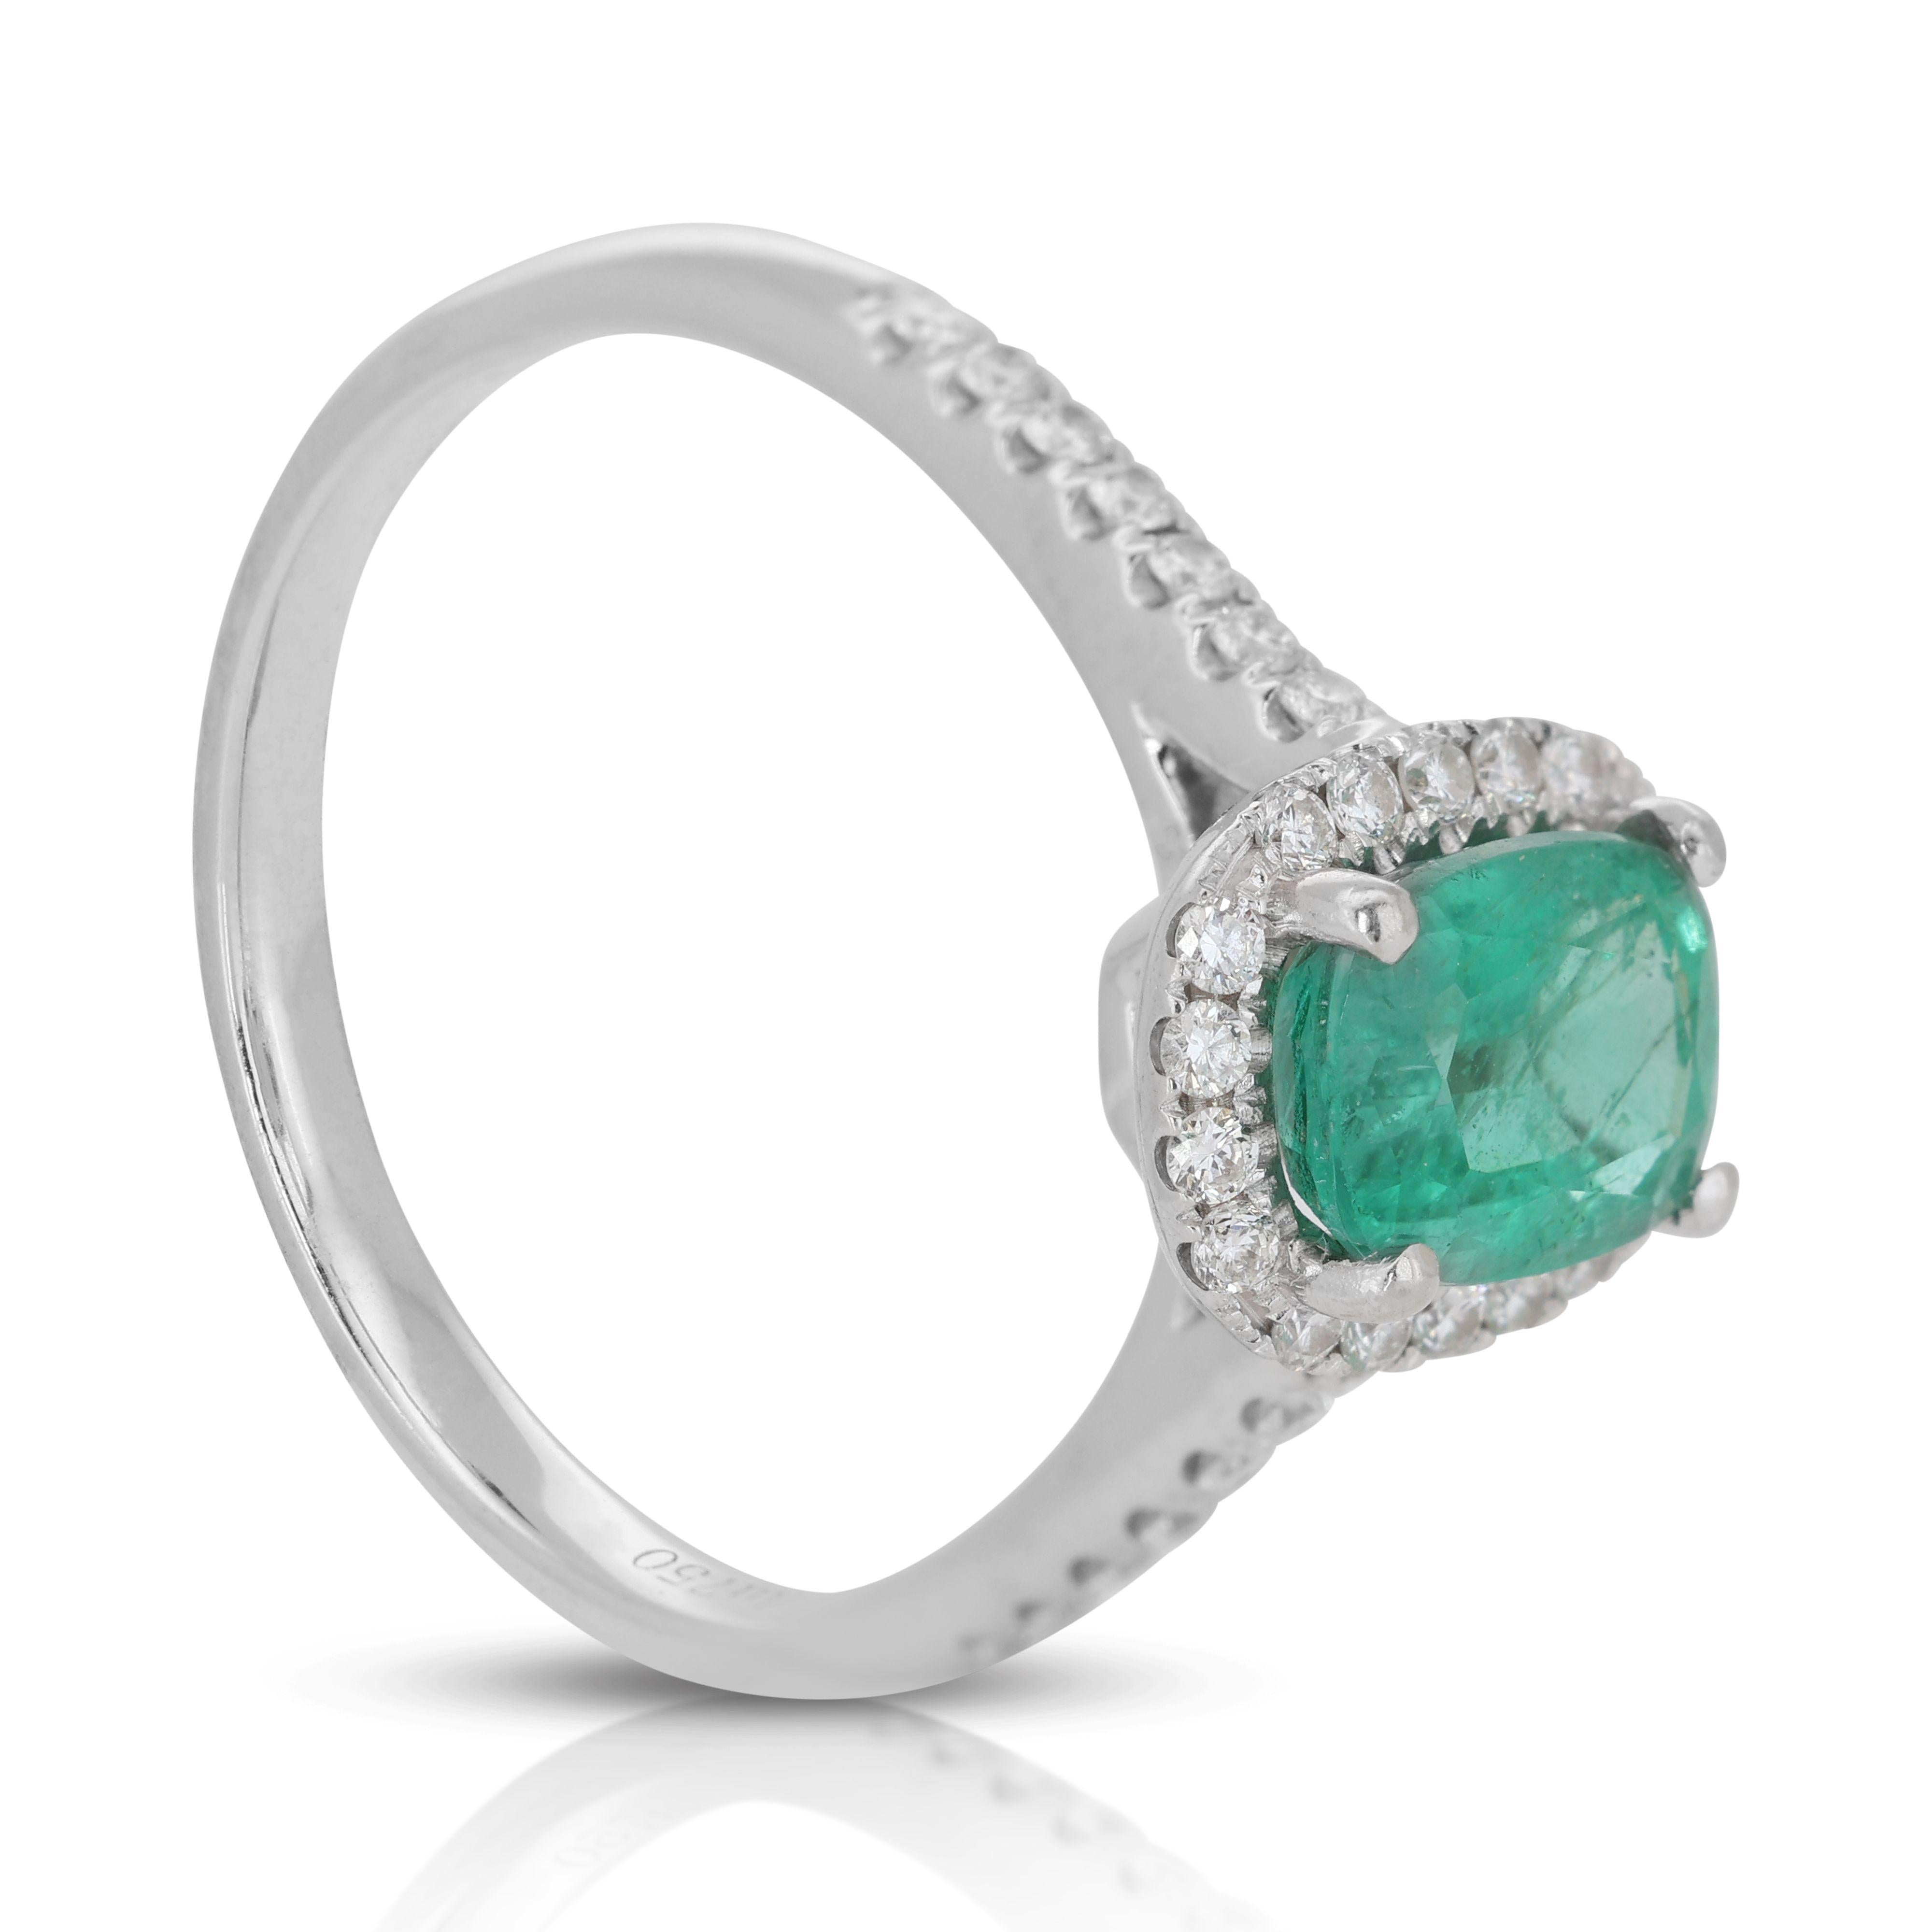 Captivating 0.69ct Emerald Ring with 0.29ct Diamond Side Stones For Sale 3